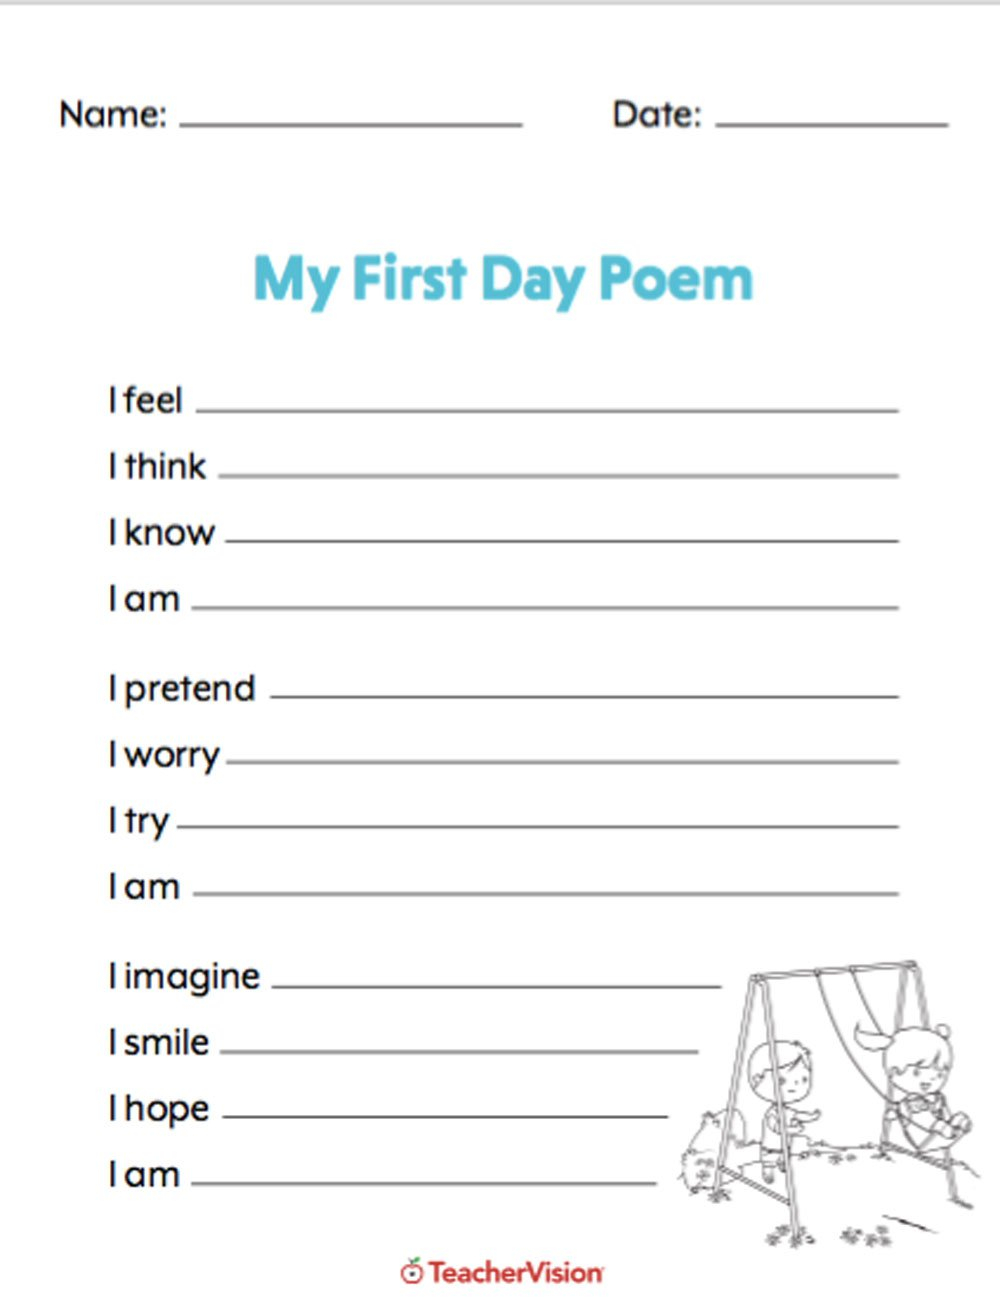 Popular Poetry Printables And Resources  Teachervision Within Poetry Worksheets Middle School